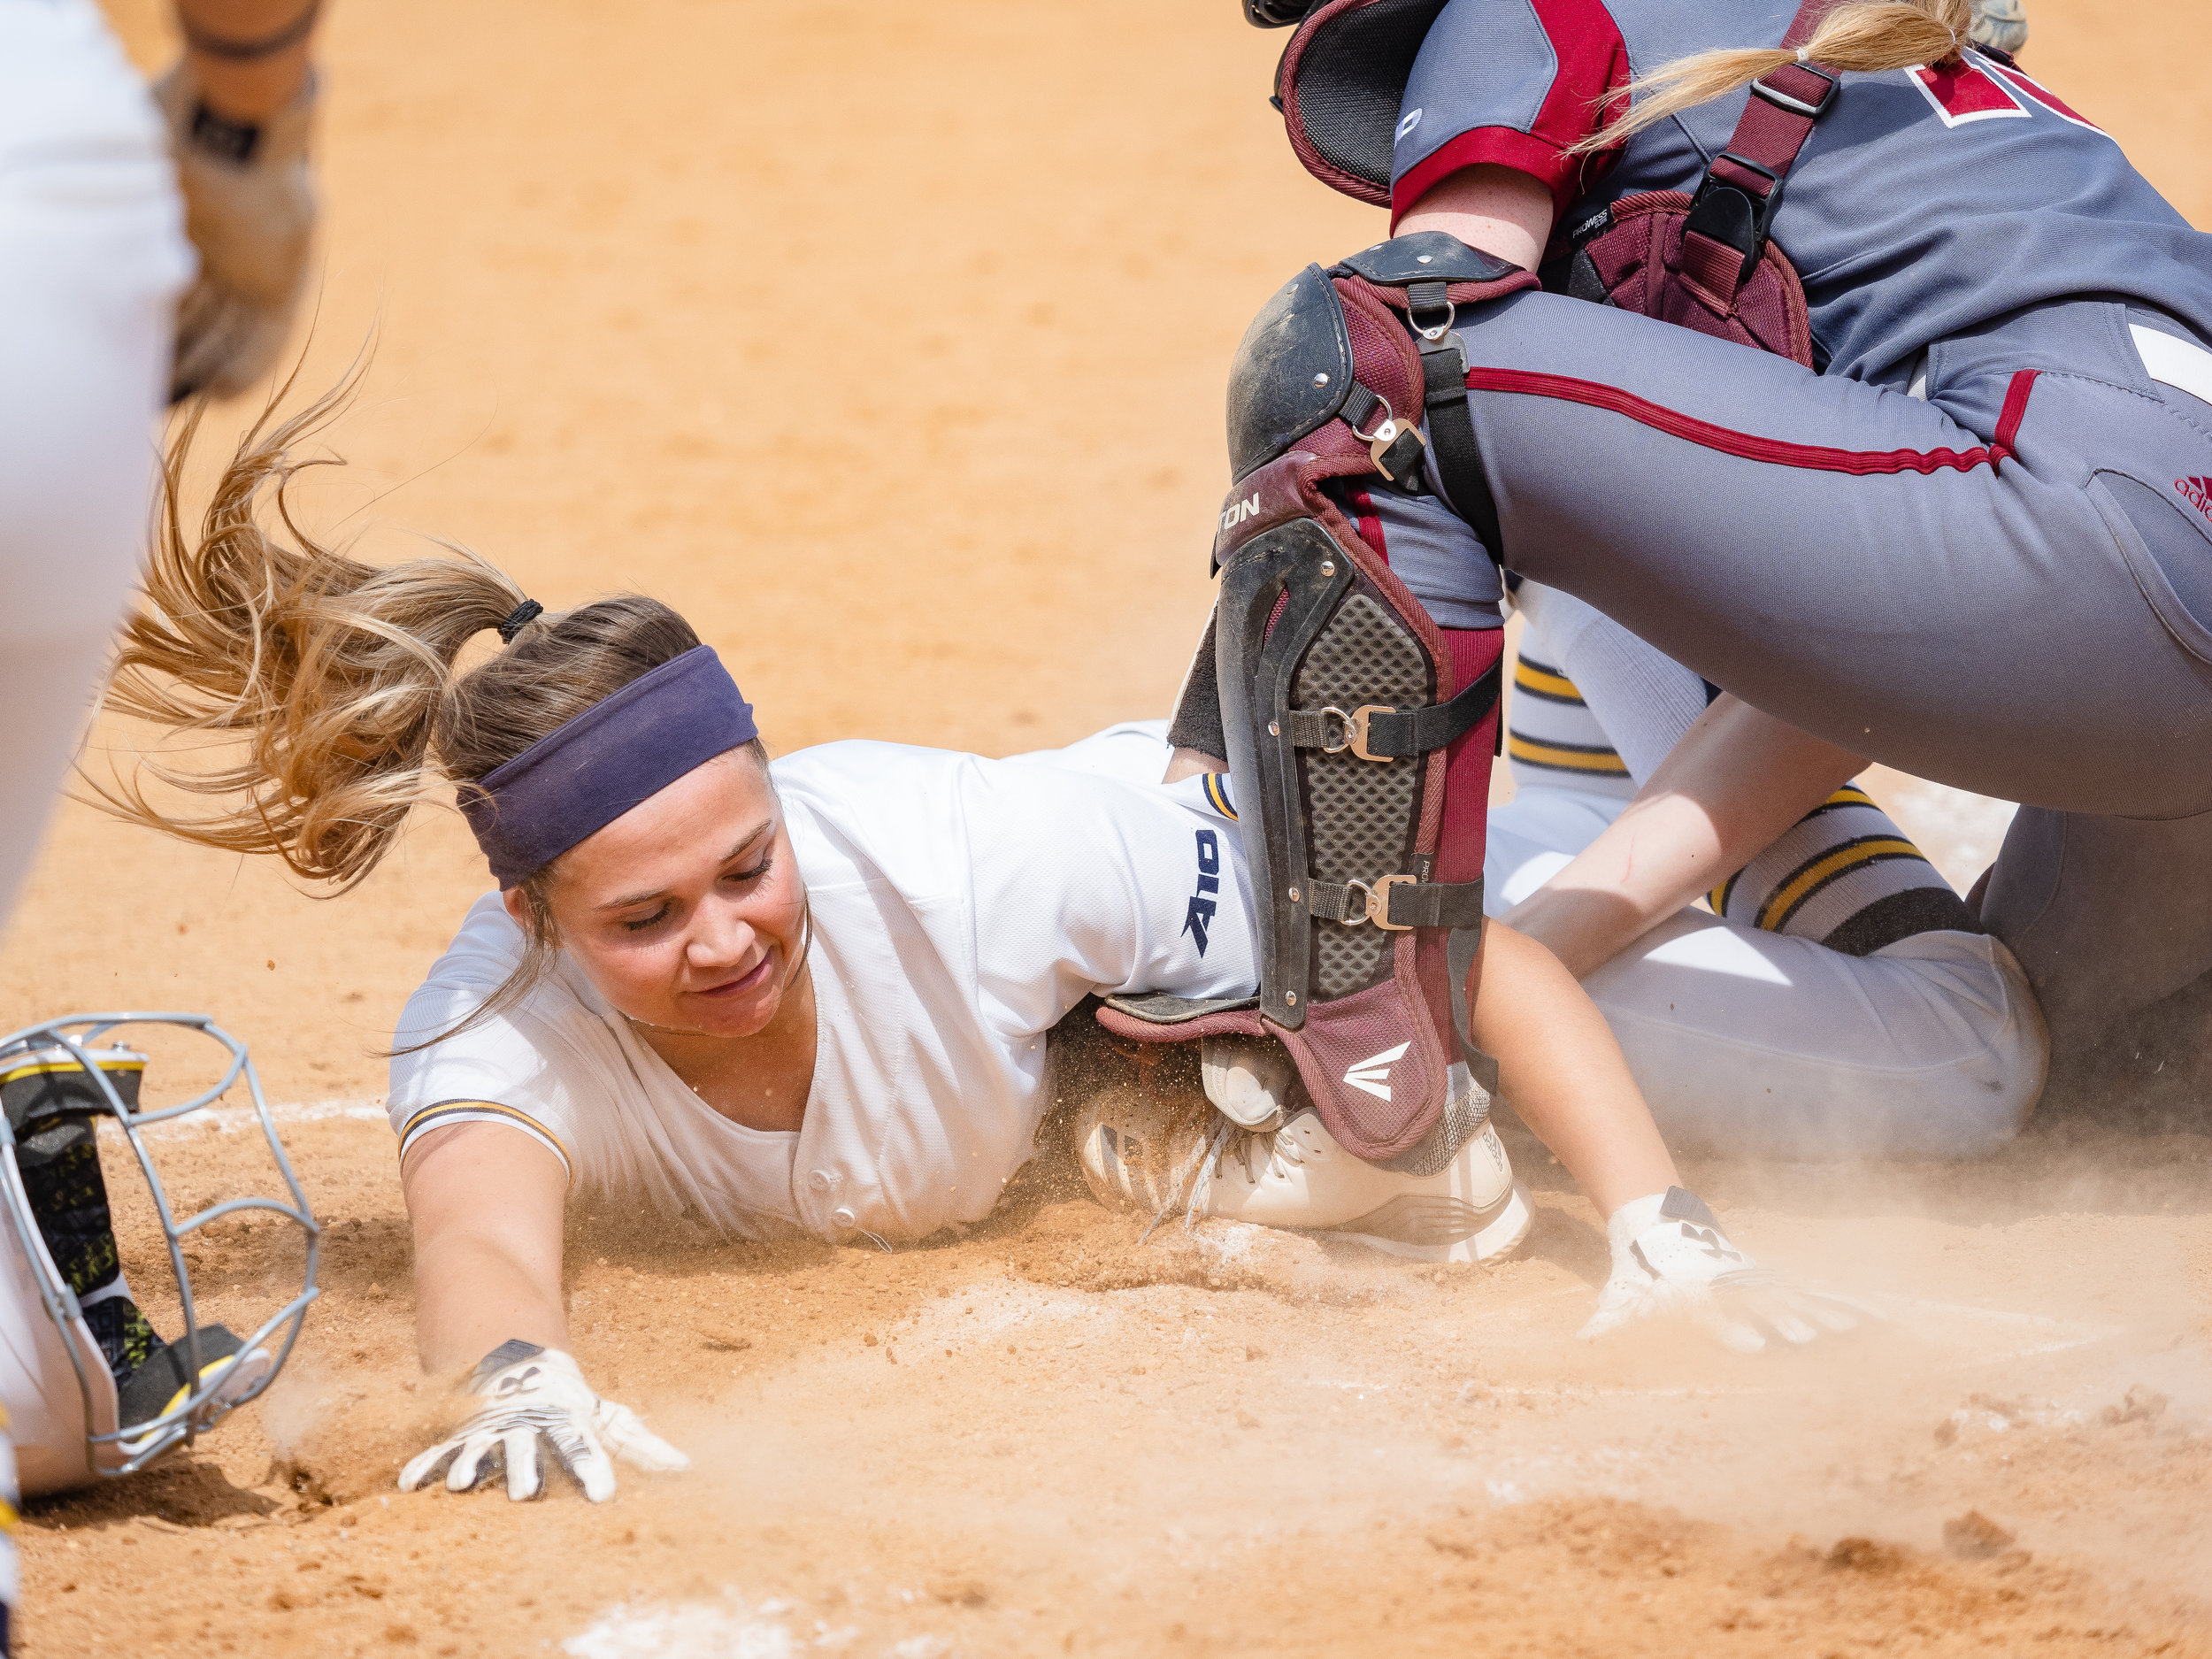  Softball vs La Salle in third game of series on Sunday, April 7, 2019. 
(Photo by Judith Gibson-Okunieff) 